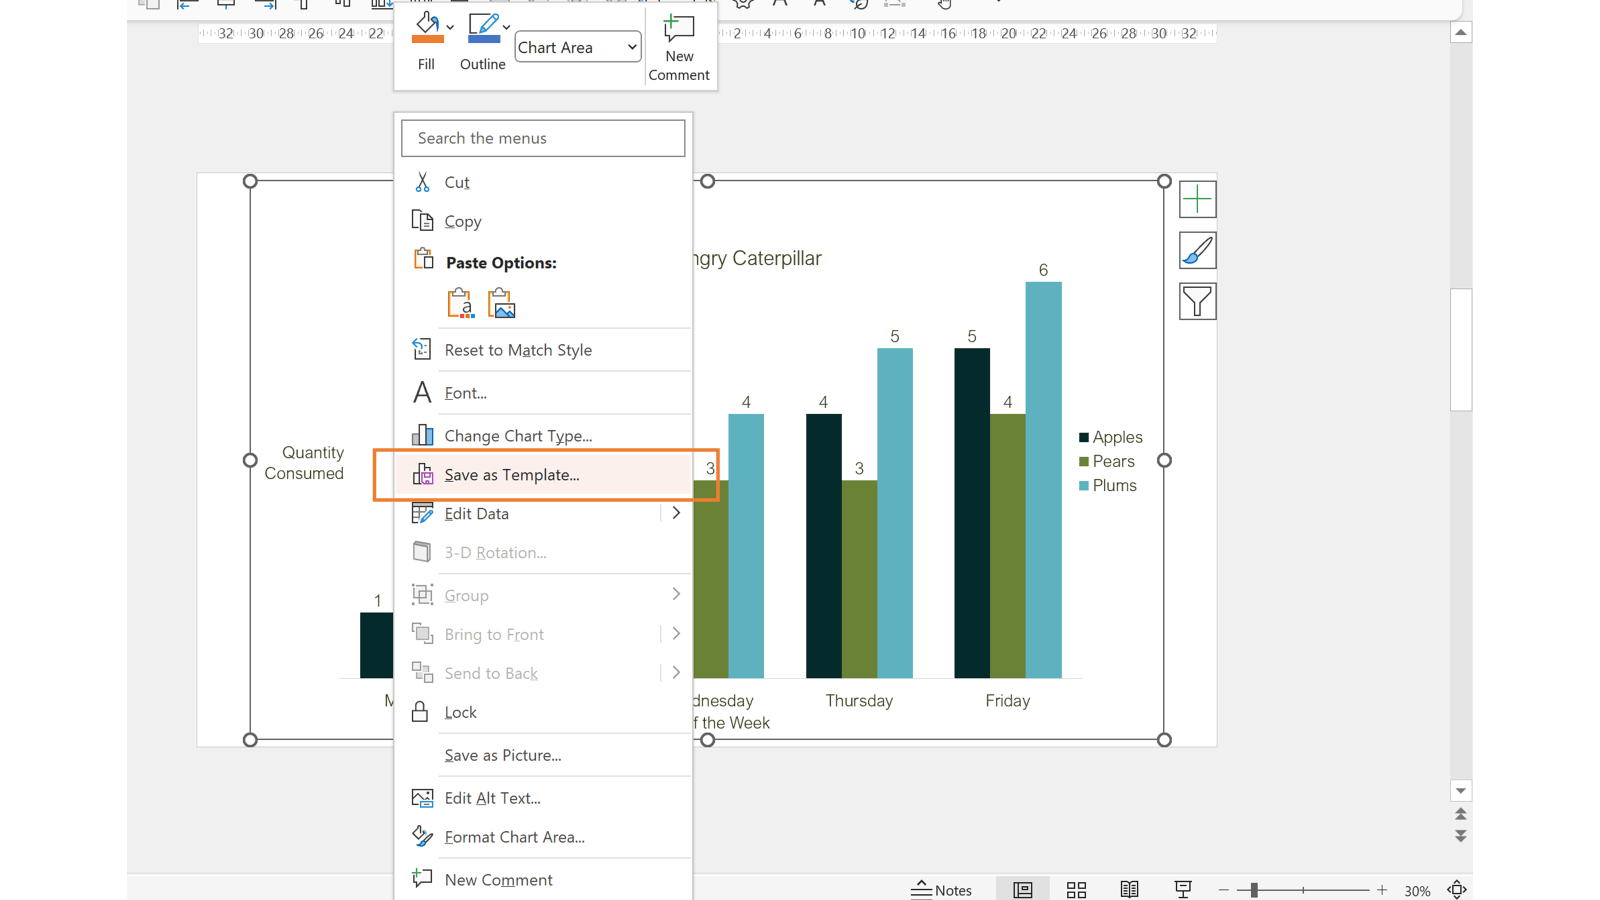 Same bar chart as previous image with the right-click menu expanded and the 'Save as Template...' option highlighted.